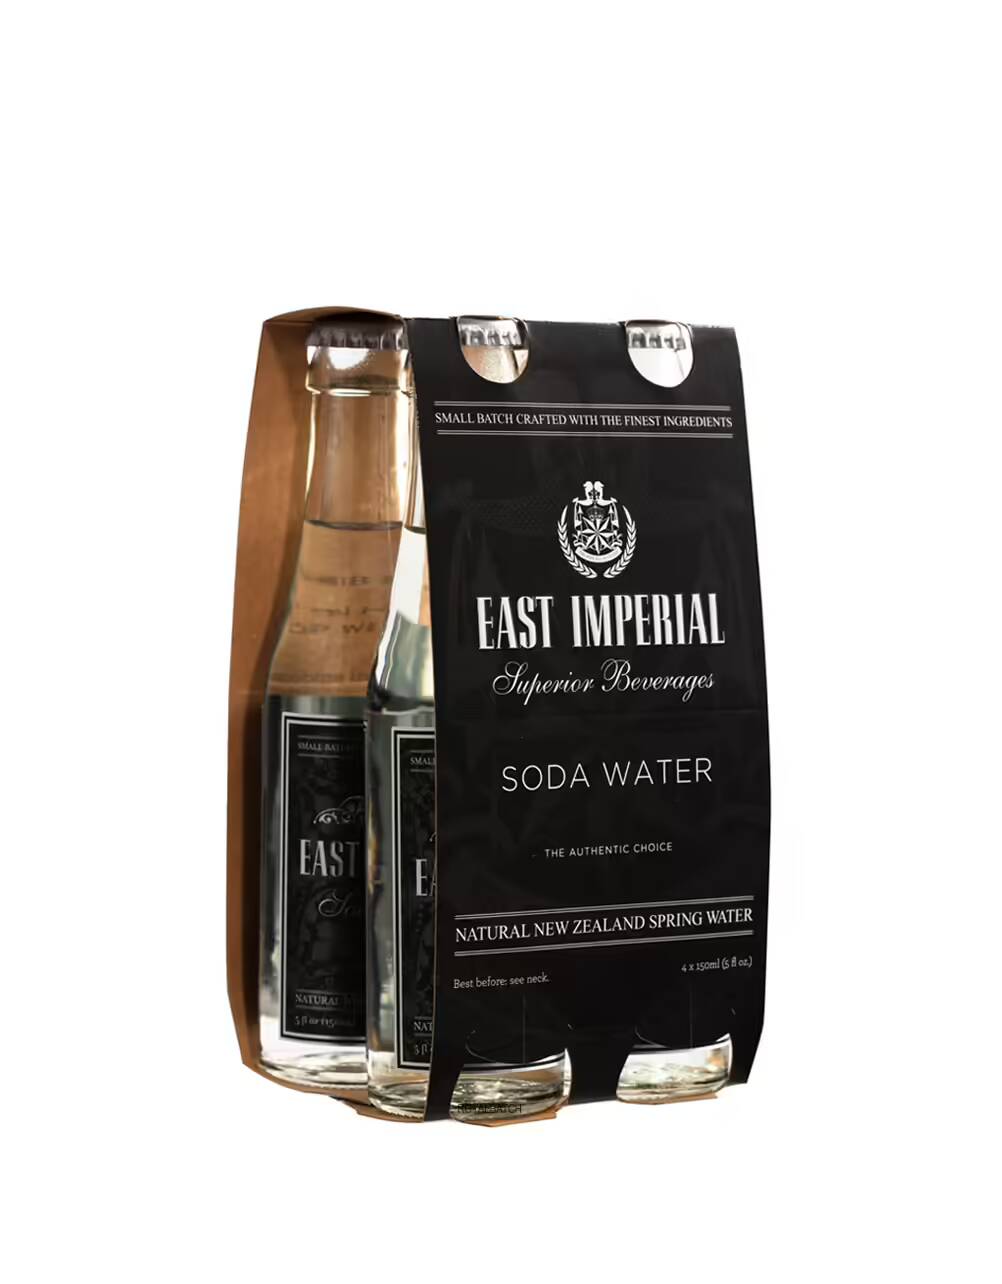 East Imperial Superior Beverages Soda Water (4 Pack) 150ml